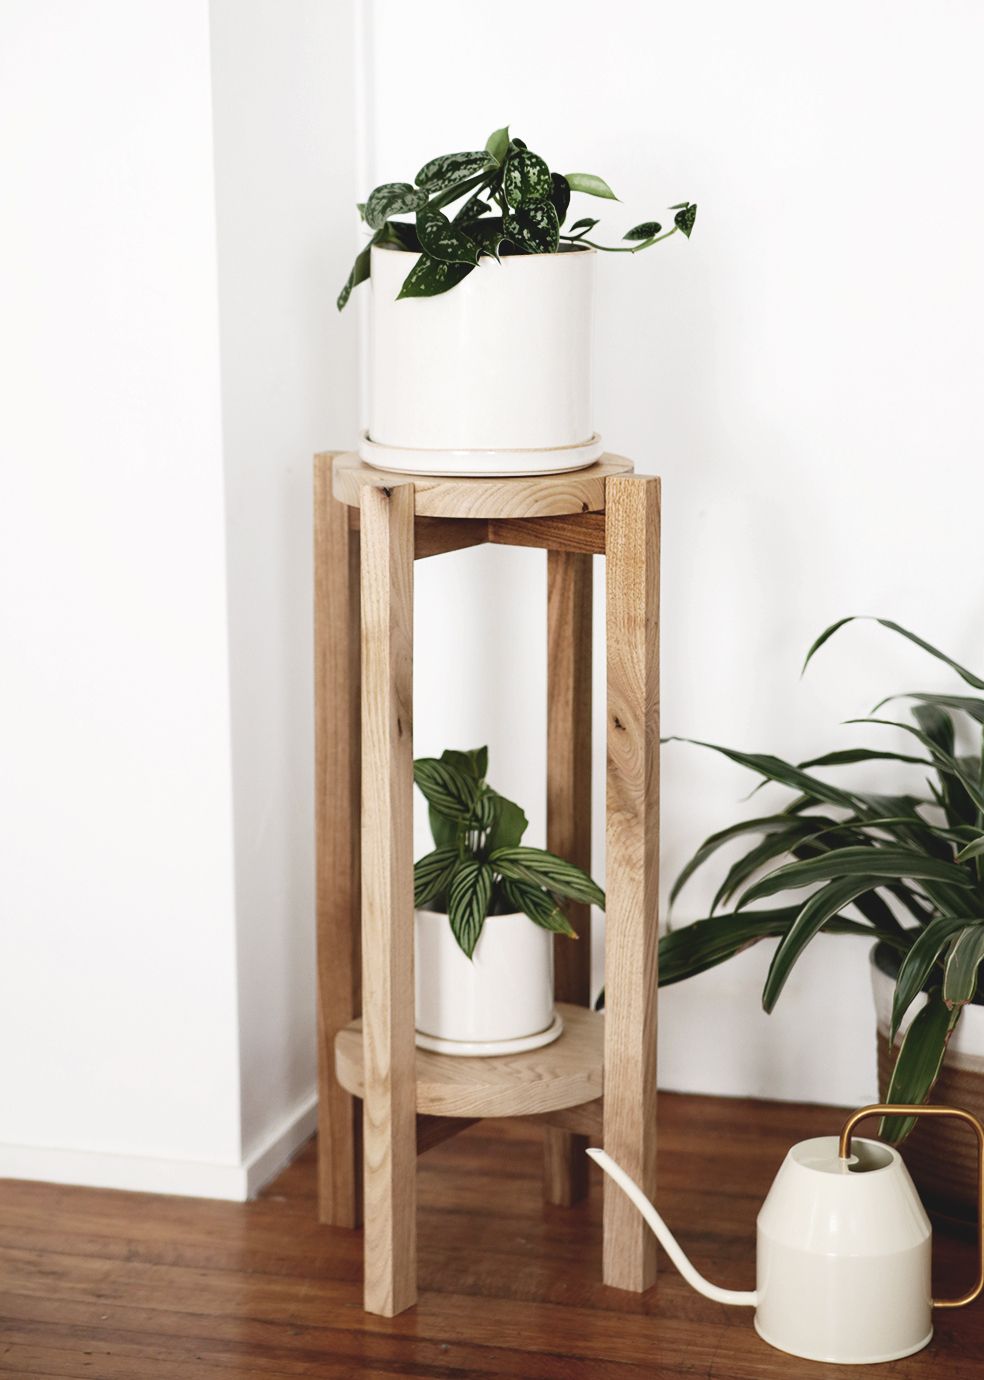 Diy Wood Plant Stand – A Simple Diy With A Video Tutorial Intended For Wood Plant Stands (View 2 of 15)